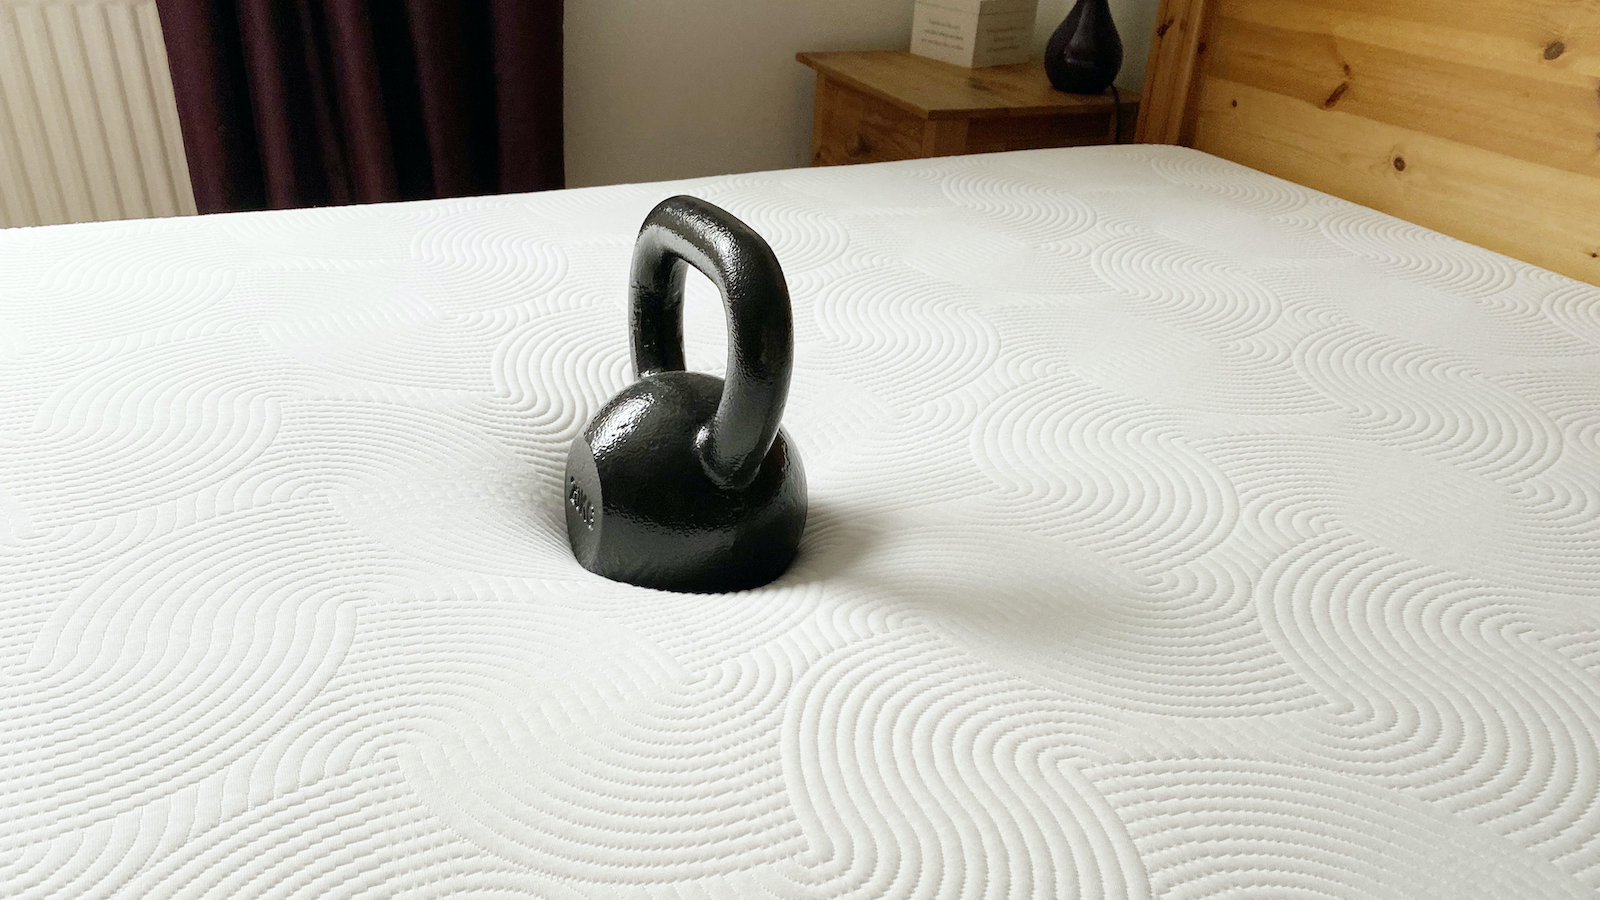 Image shows a 20kg black weight placed in the middle of the Brook + Wilde Lux Mattress during a pressure relief test